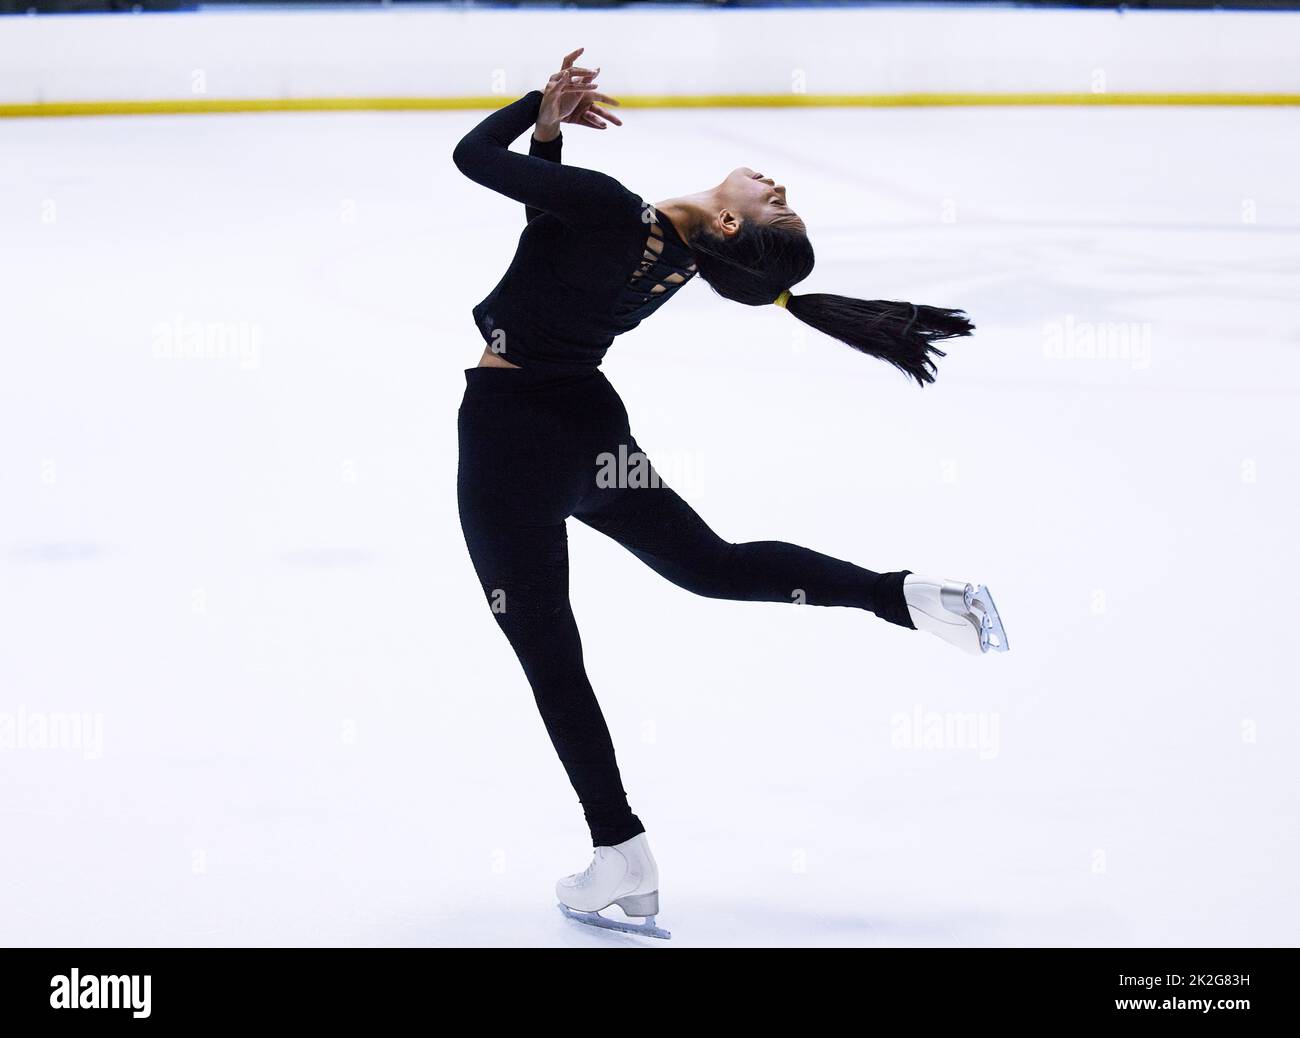 To see her skate is to believe in magic. Shot of a young woman figure skating at a sports arena. Stock Photo